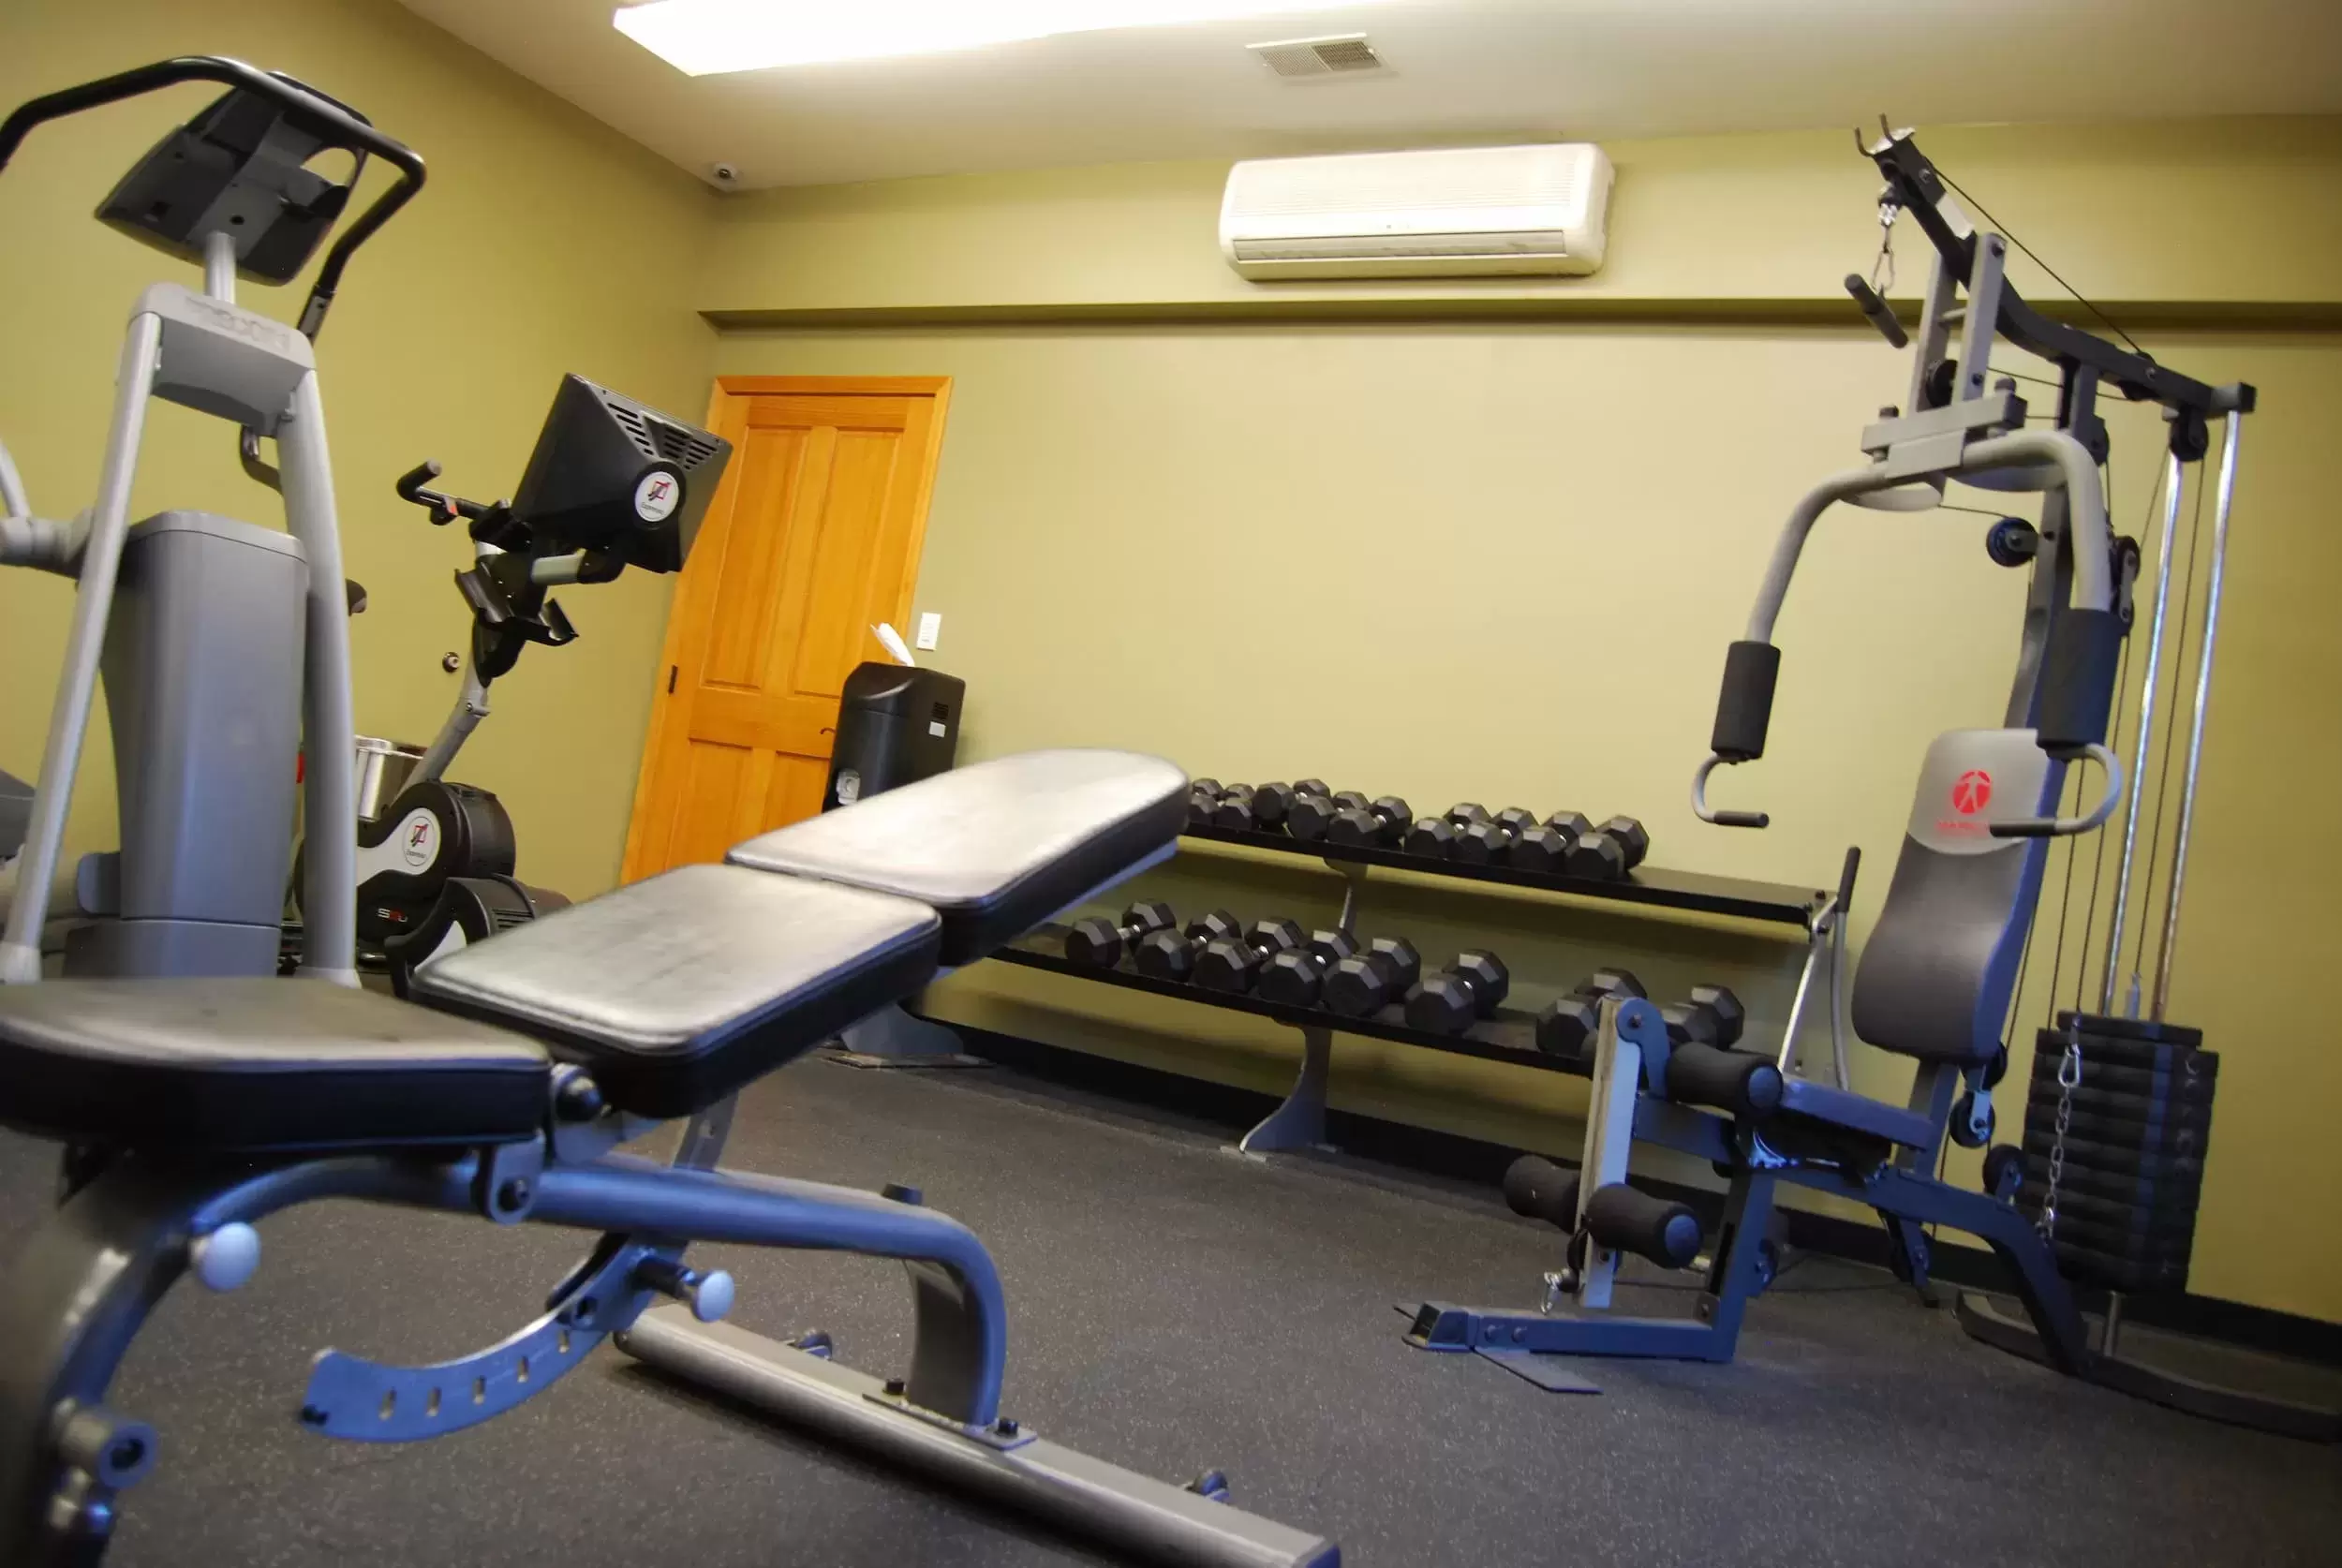 Equipment in the fitness center at Liv Wildwood Apartments